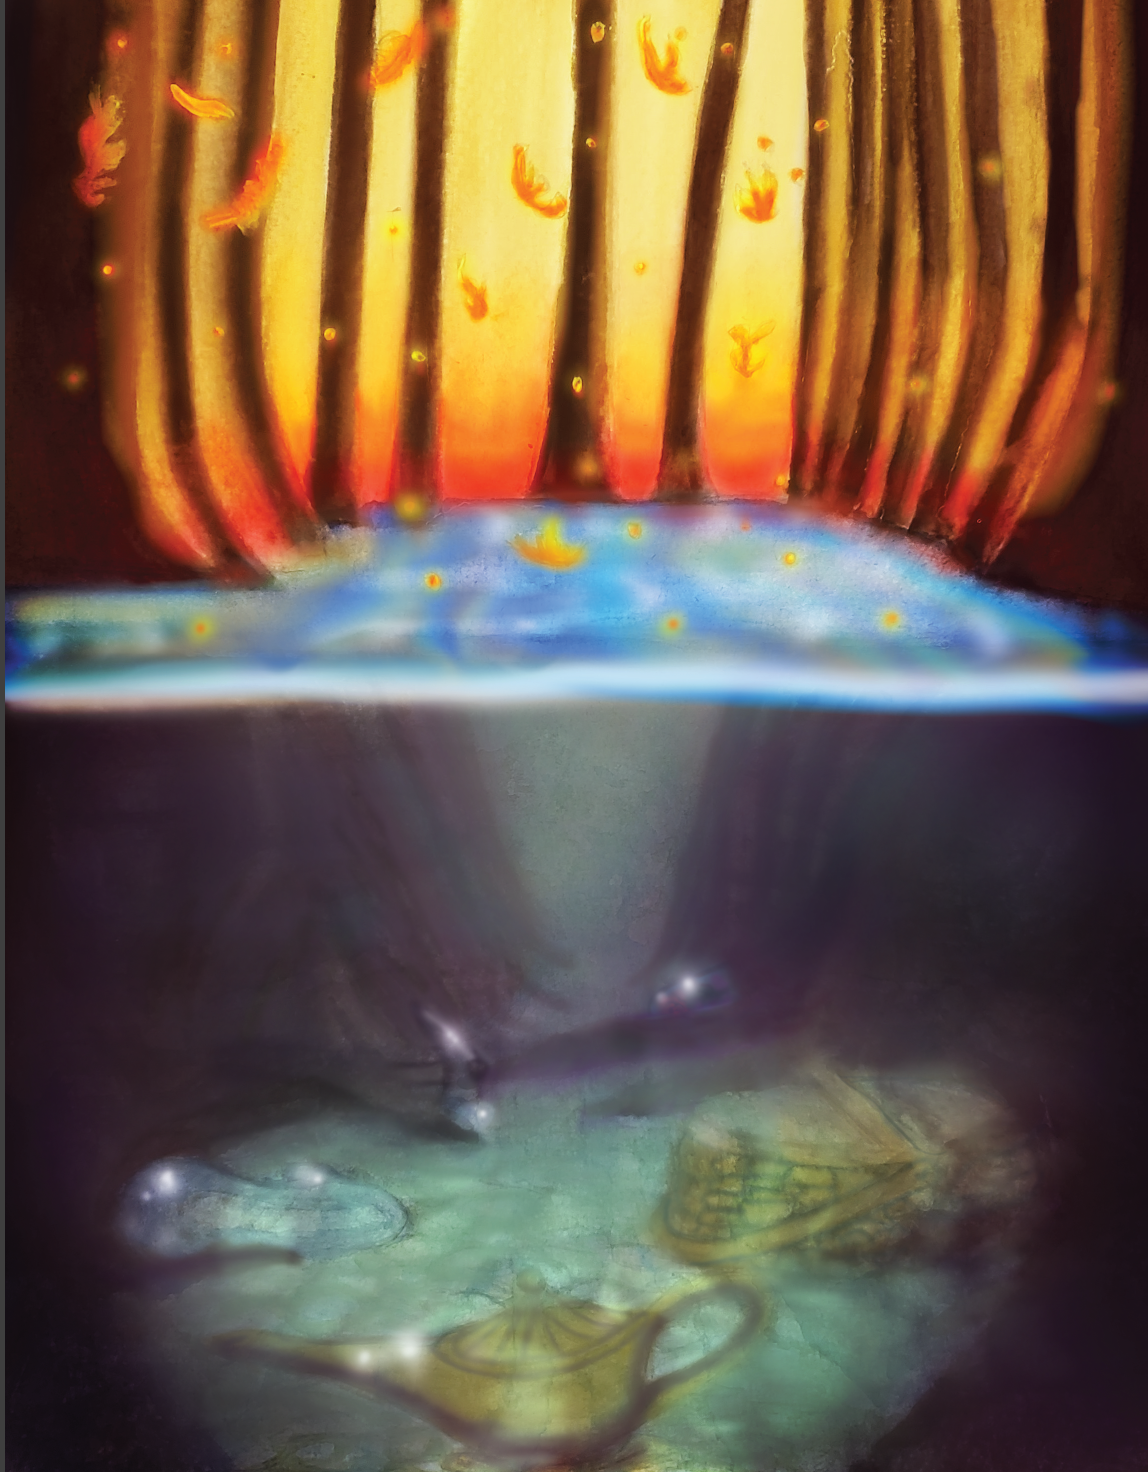 Digital Image of a River in a forest with the sunseting in the background through the trees. The image is split in two so that you can see forgotten treasure under the water such as a lamp, a glass slipper and other blurry items in the murky depths.